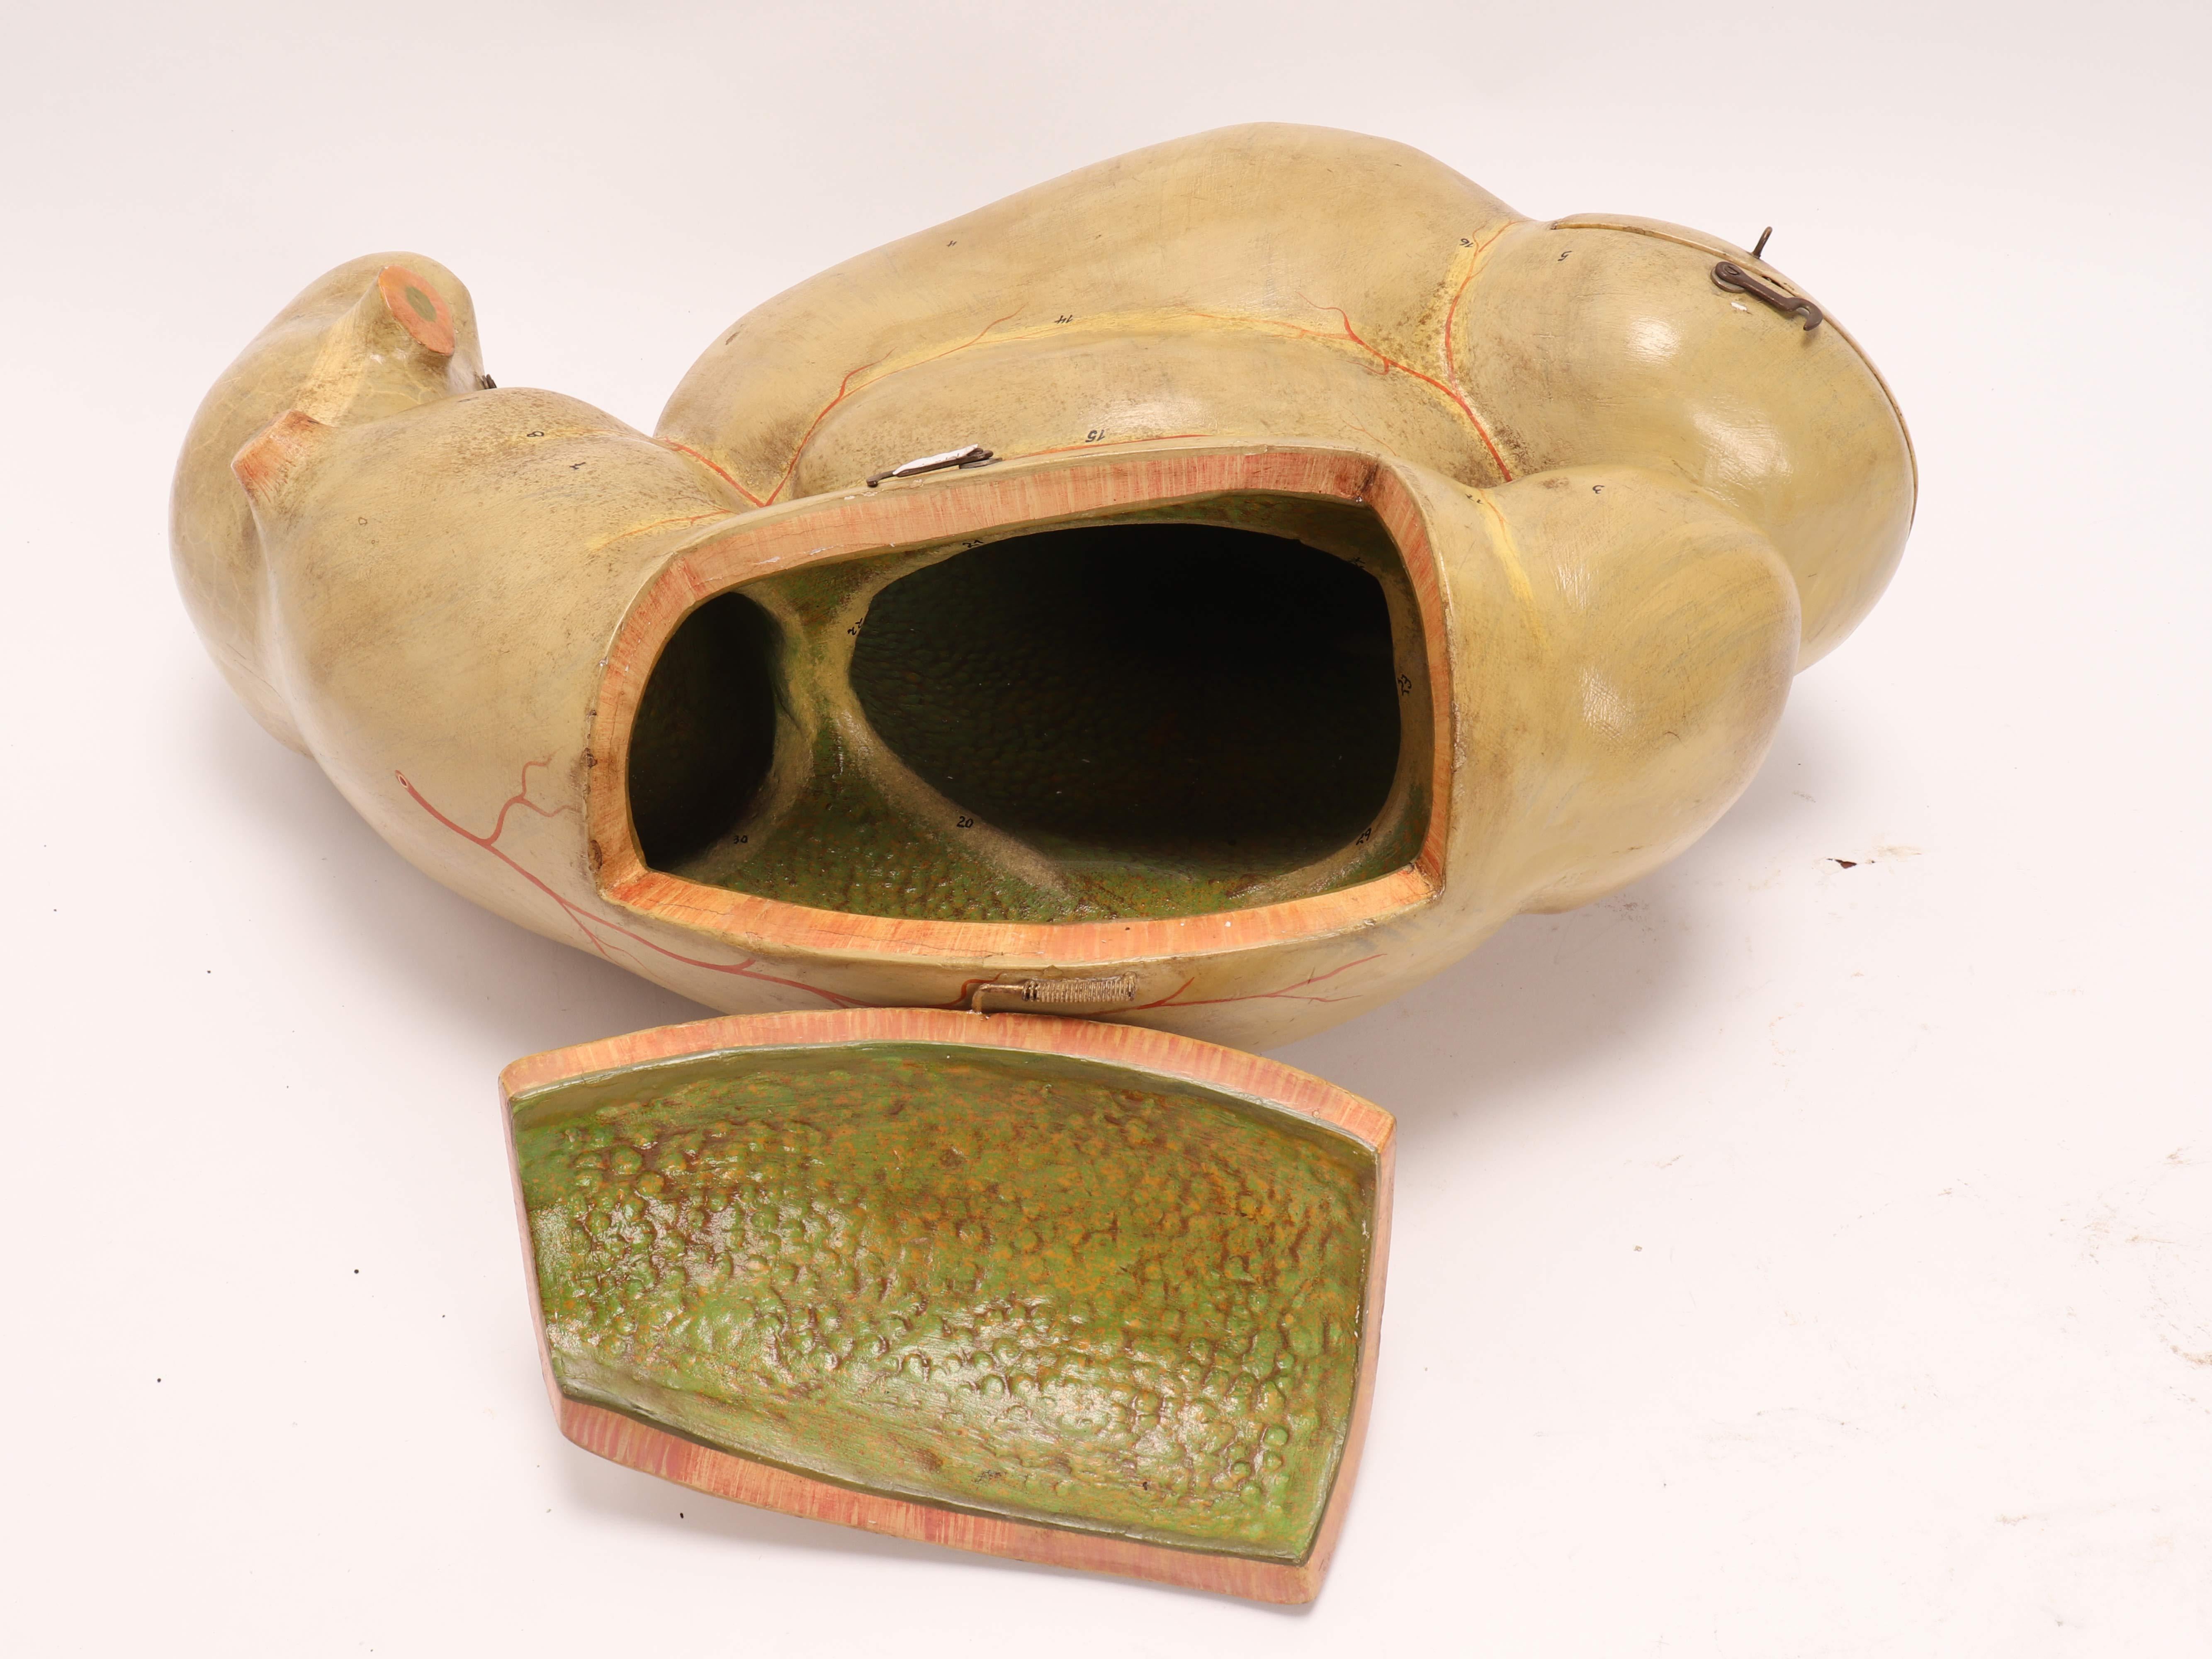 Anatomic model for class, depicting a man’s intestine, made out of painted papier maché. Italy 1890 ca.